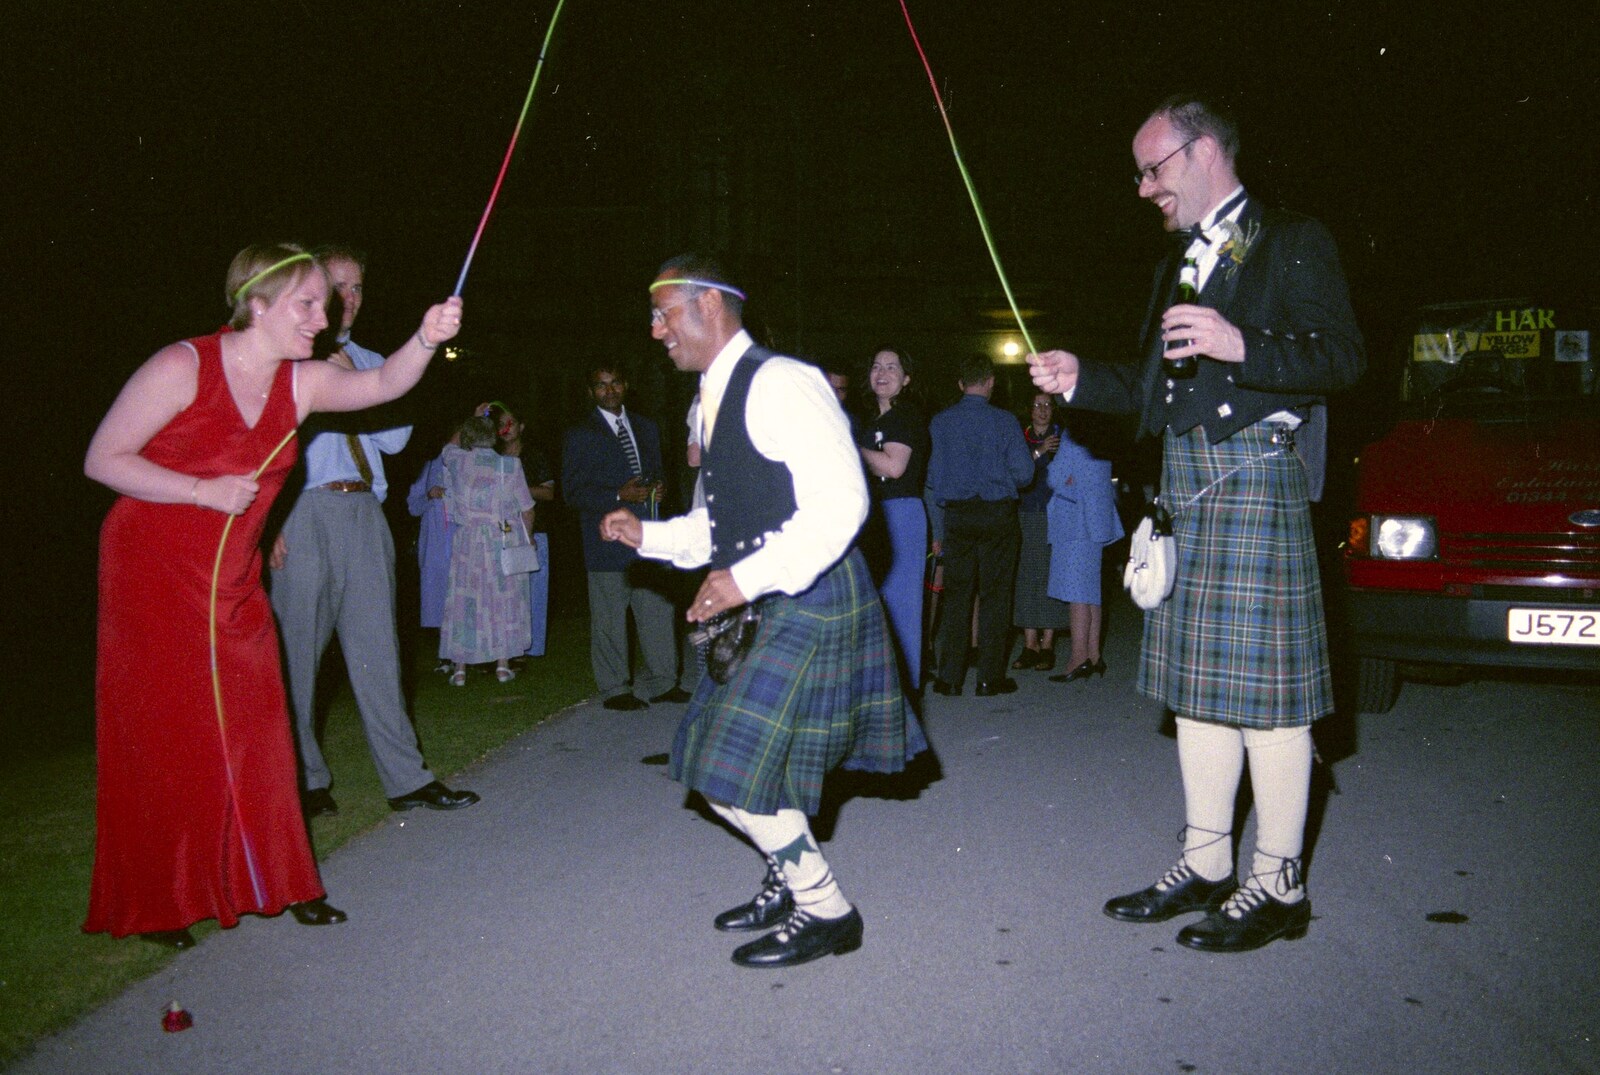 Hamish and Jane's Wedding, Canford School, Wimborne, Dorset - 5th August 1998: Skipping over a light-rope in the car park